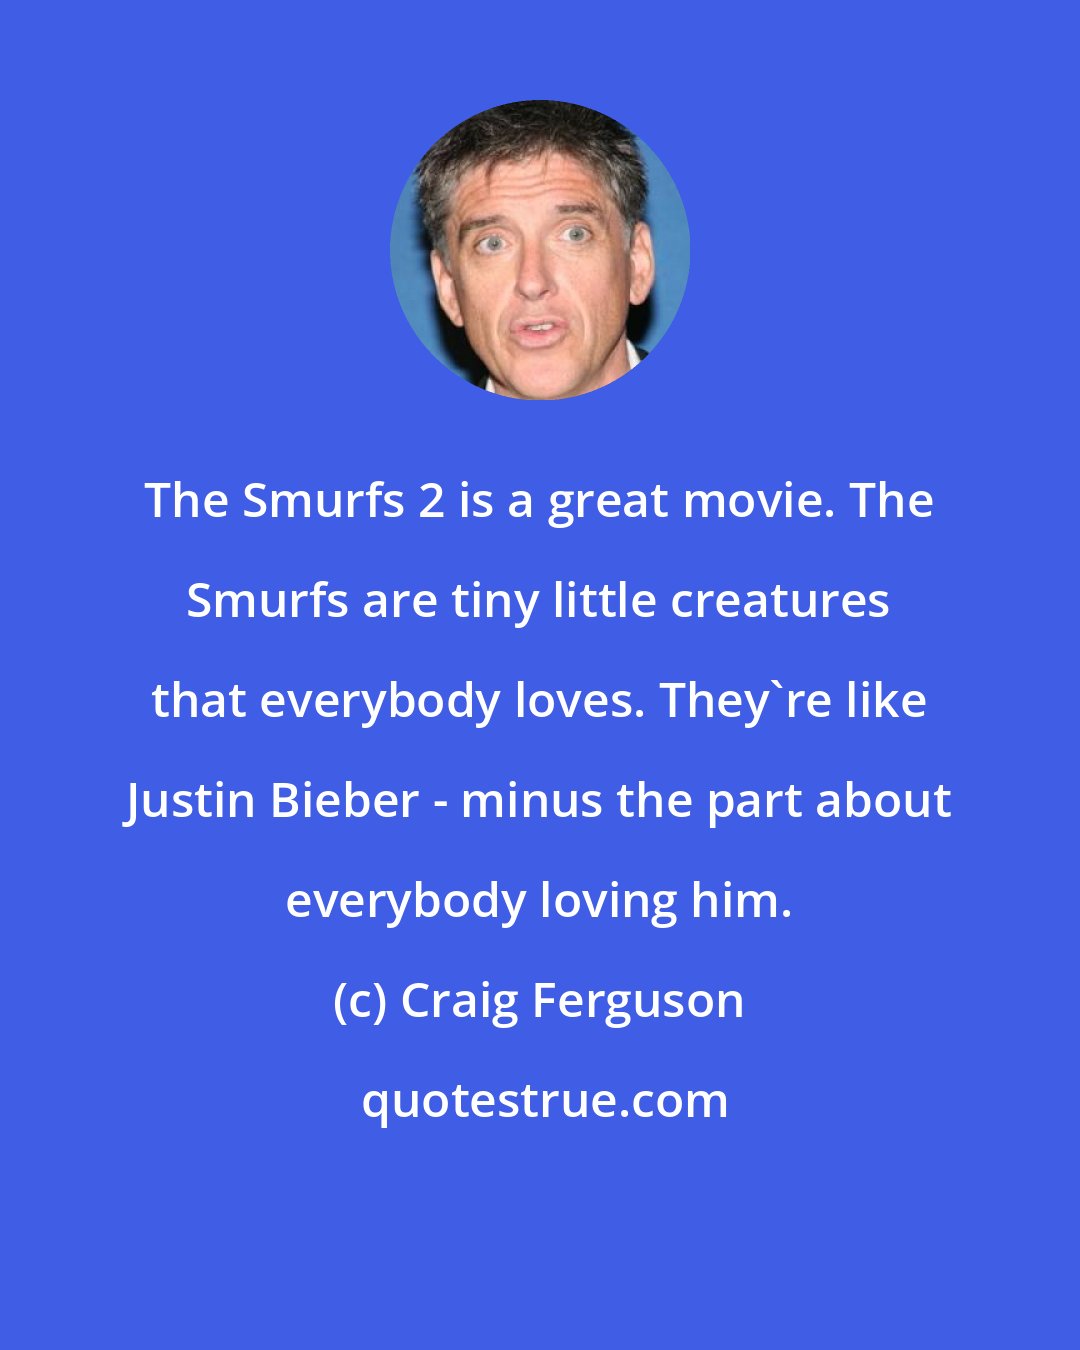 Craig Ferguson: The Smurfs 2 is a great movie. The Smurfs are tiny little creatures that everybody loves. They're like Justin Bieber - minus the part about everybody loving him.